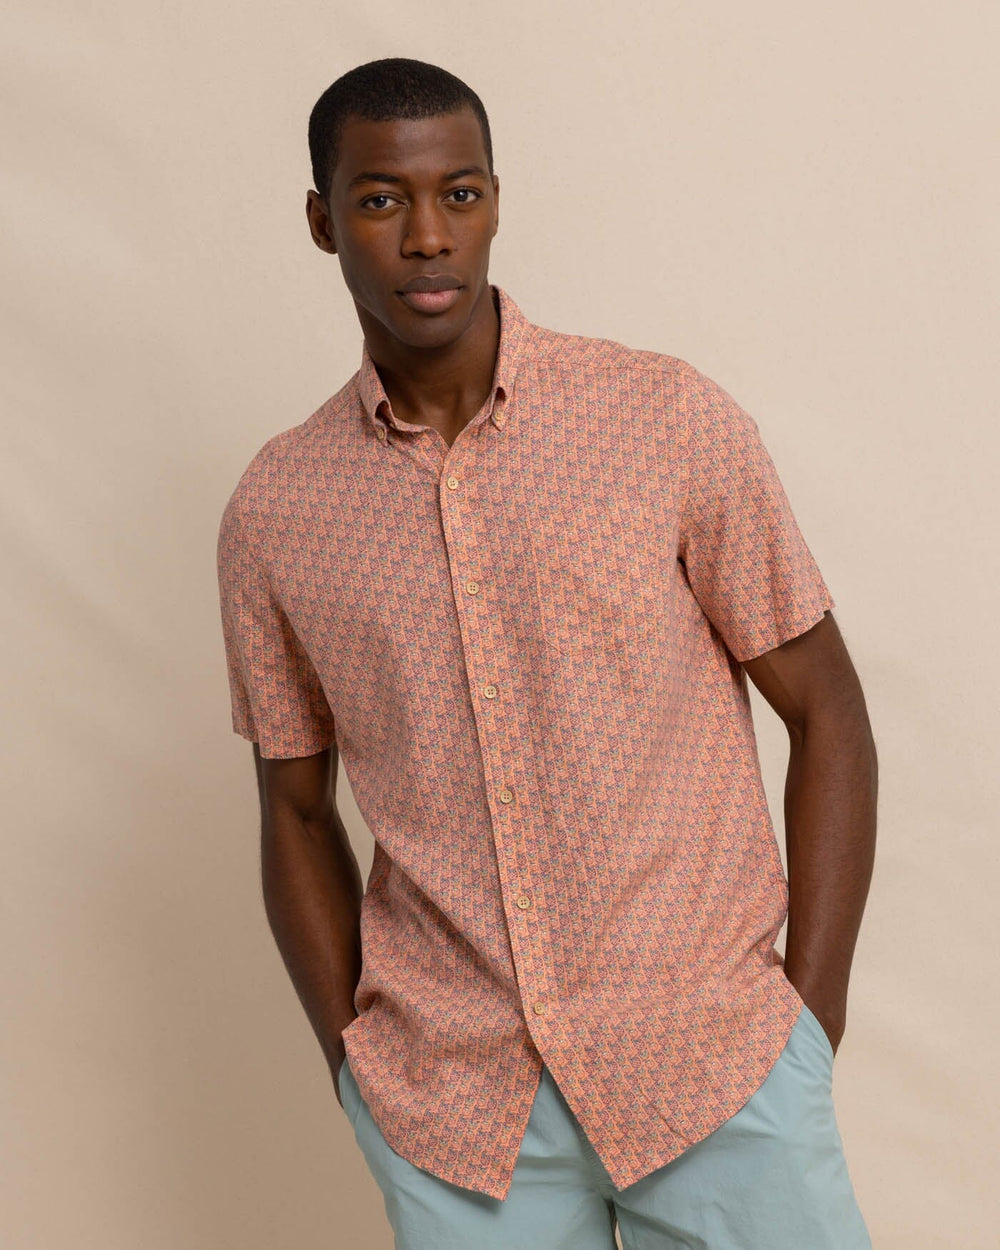 The front view of the Southern Tide Linen Rayon Vacation Views Short Sleeve SportShirt by Southern Tide - Desert Flower Coral